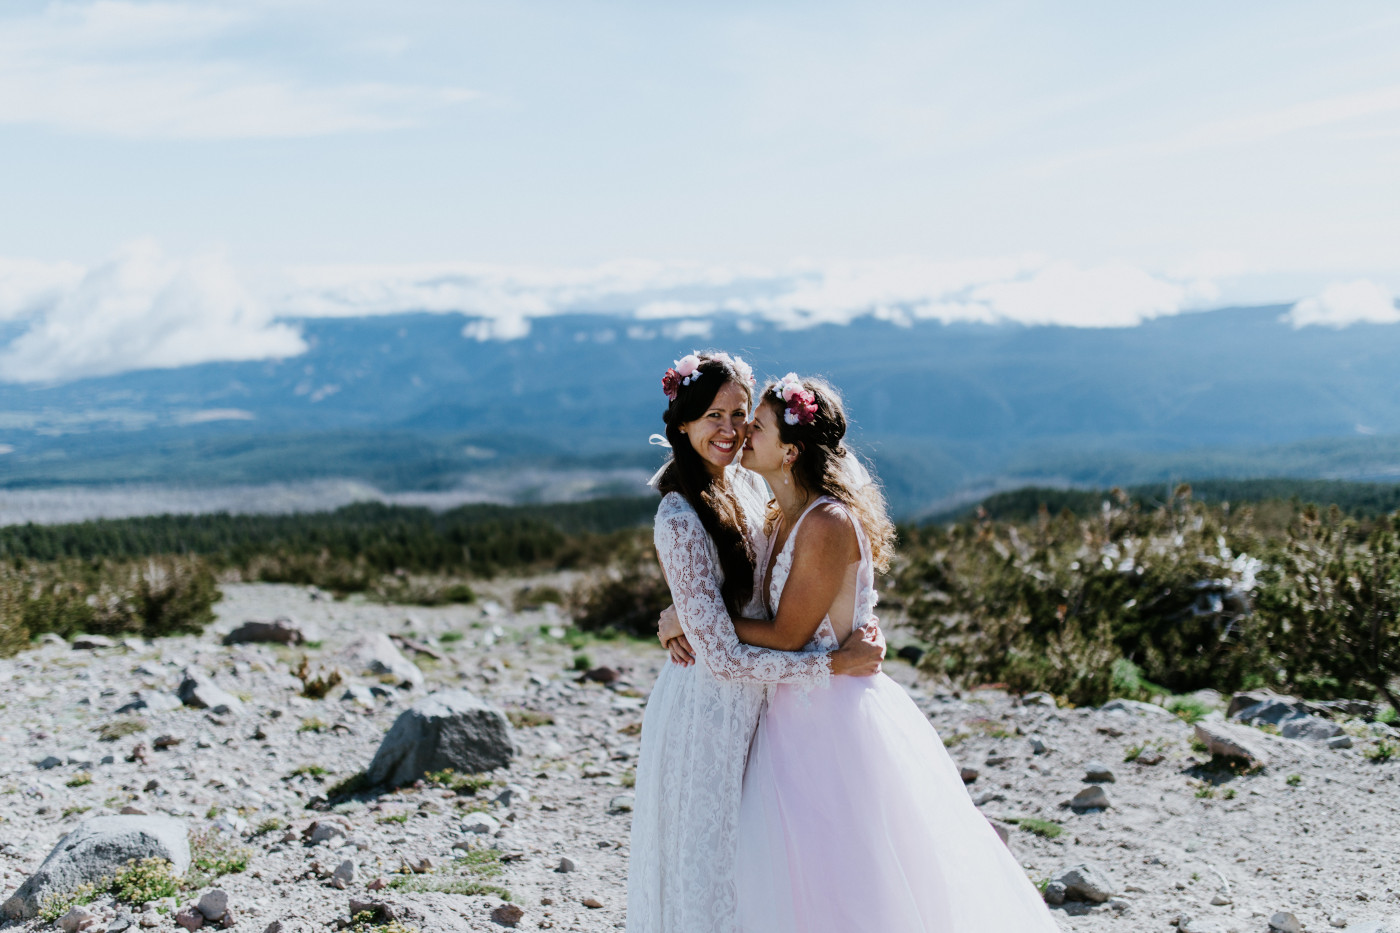 Margaux and Heather hold each other. Elopement photography at Mount Hood by Sienna Plus Josh.